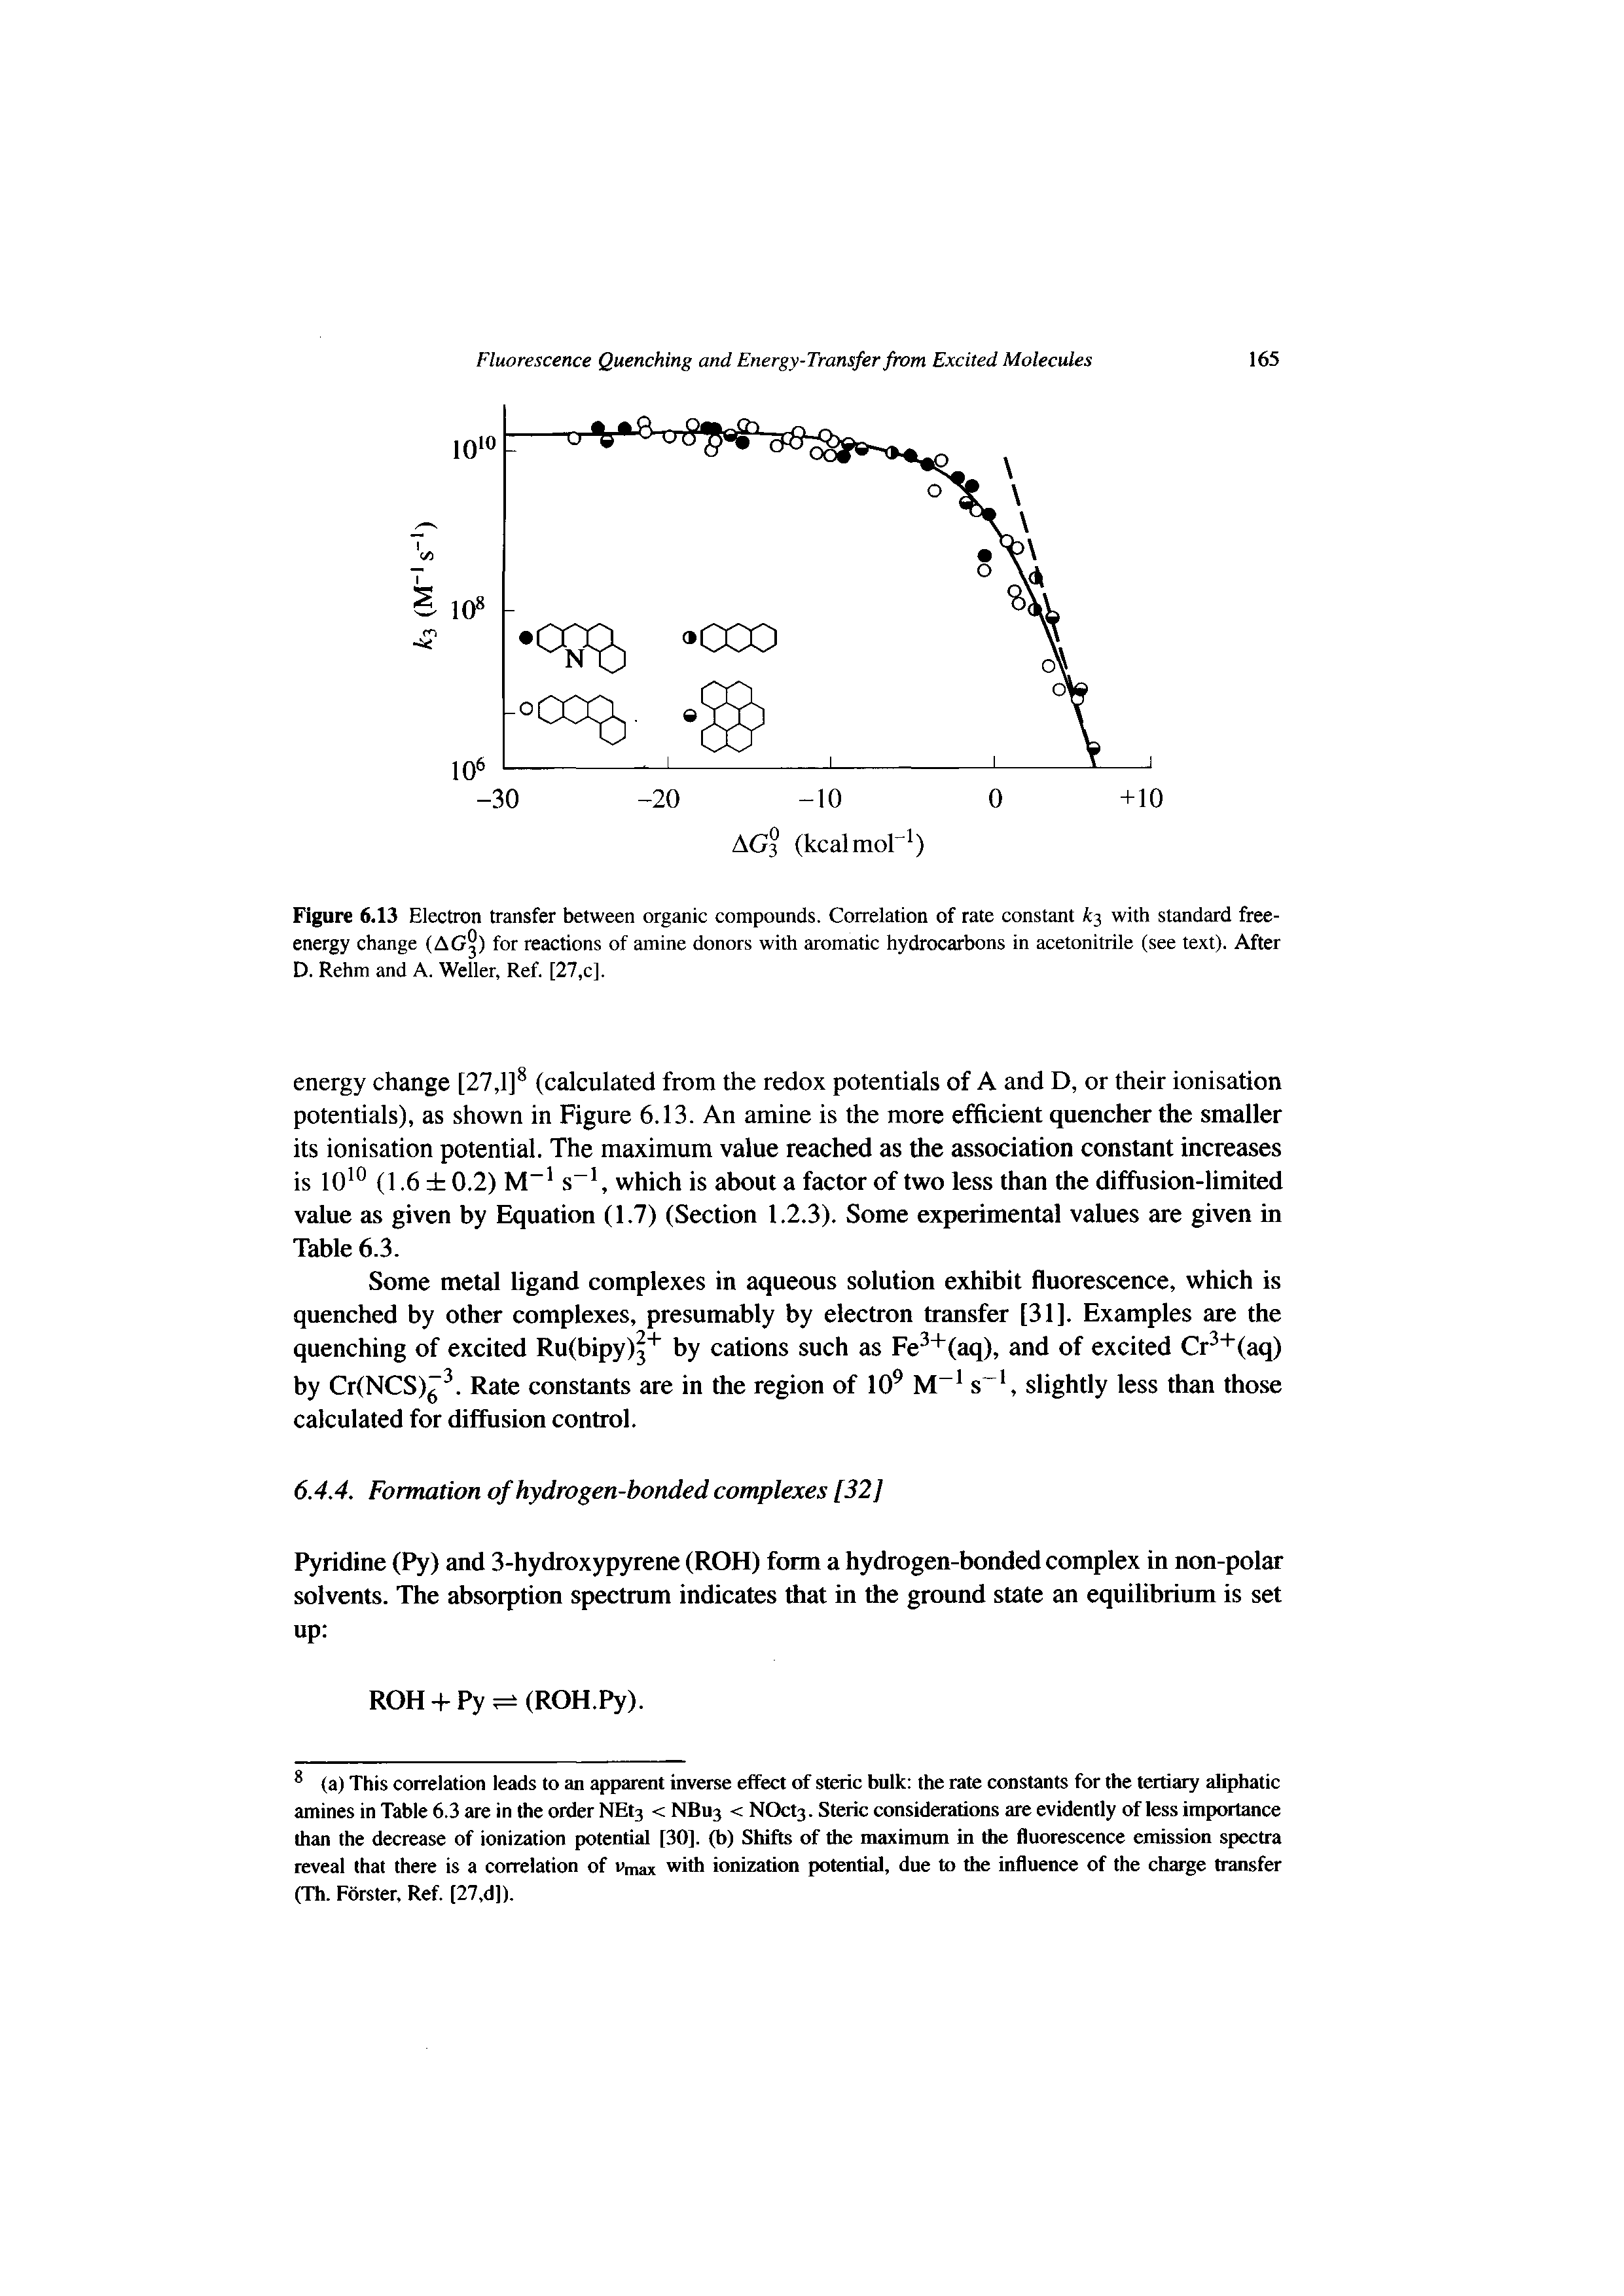 Figure 6.13 Electron transfer between organic compounds. Correlation of rate constant with standard free-energy change (AG ) for reactions of amine donors with aromatic hydrocarbons in acetonitrile (see text). After D. Rehm and A. Weller, Ref. [27,c].